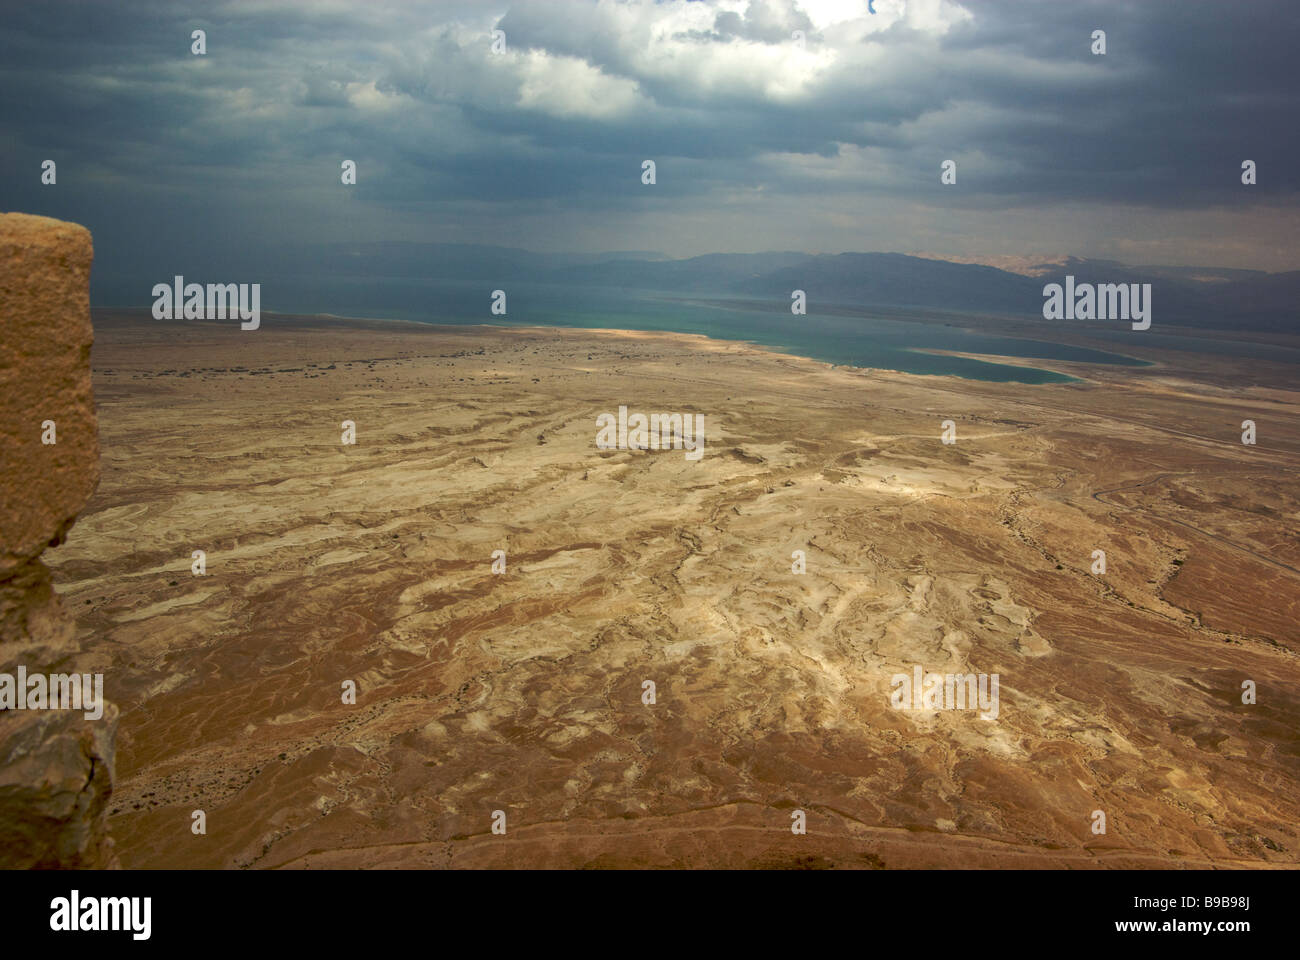 Dramatic view of Judean Desert Dead Sea remnants of several Roman legionary camps beyond the circumvallation wall from Masada Stock Photo